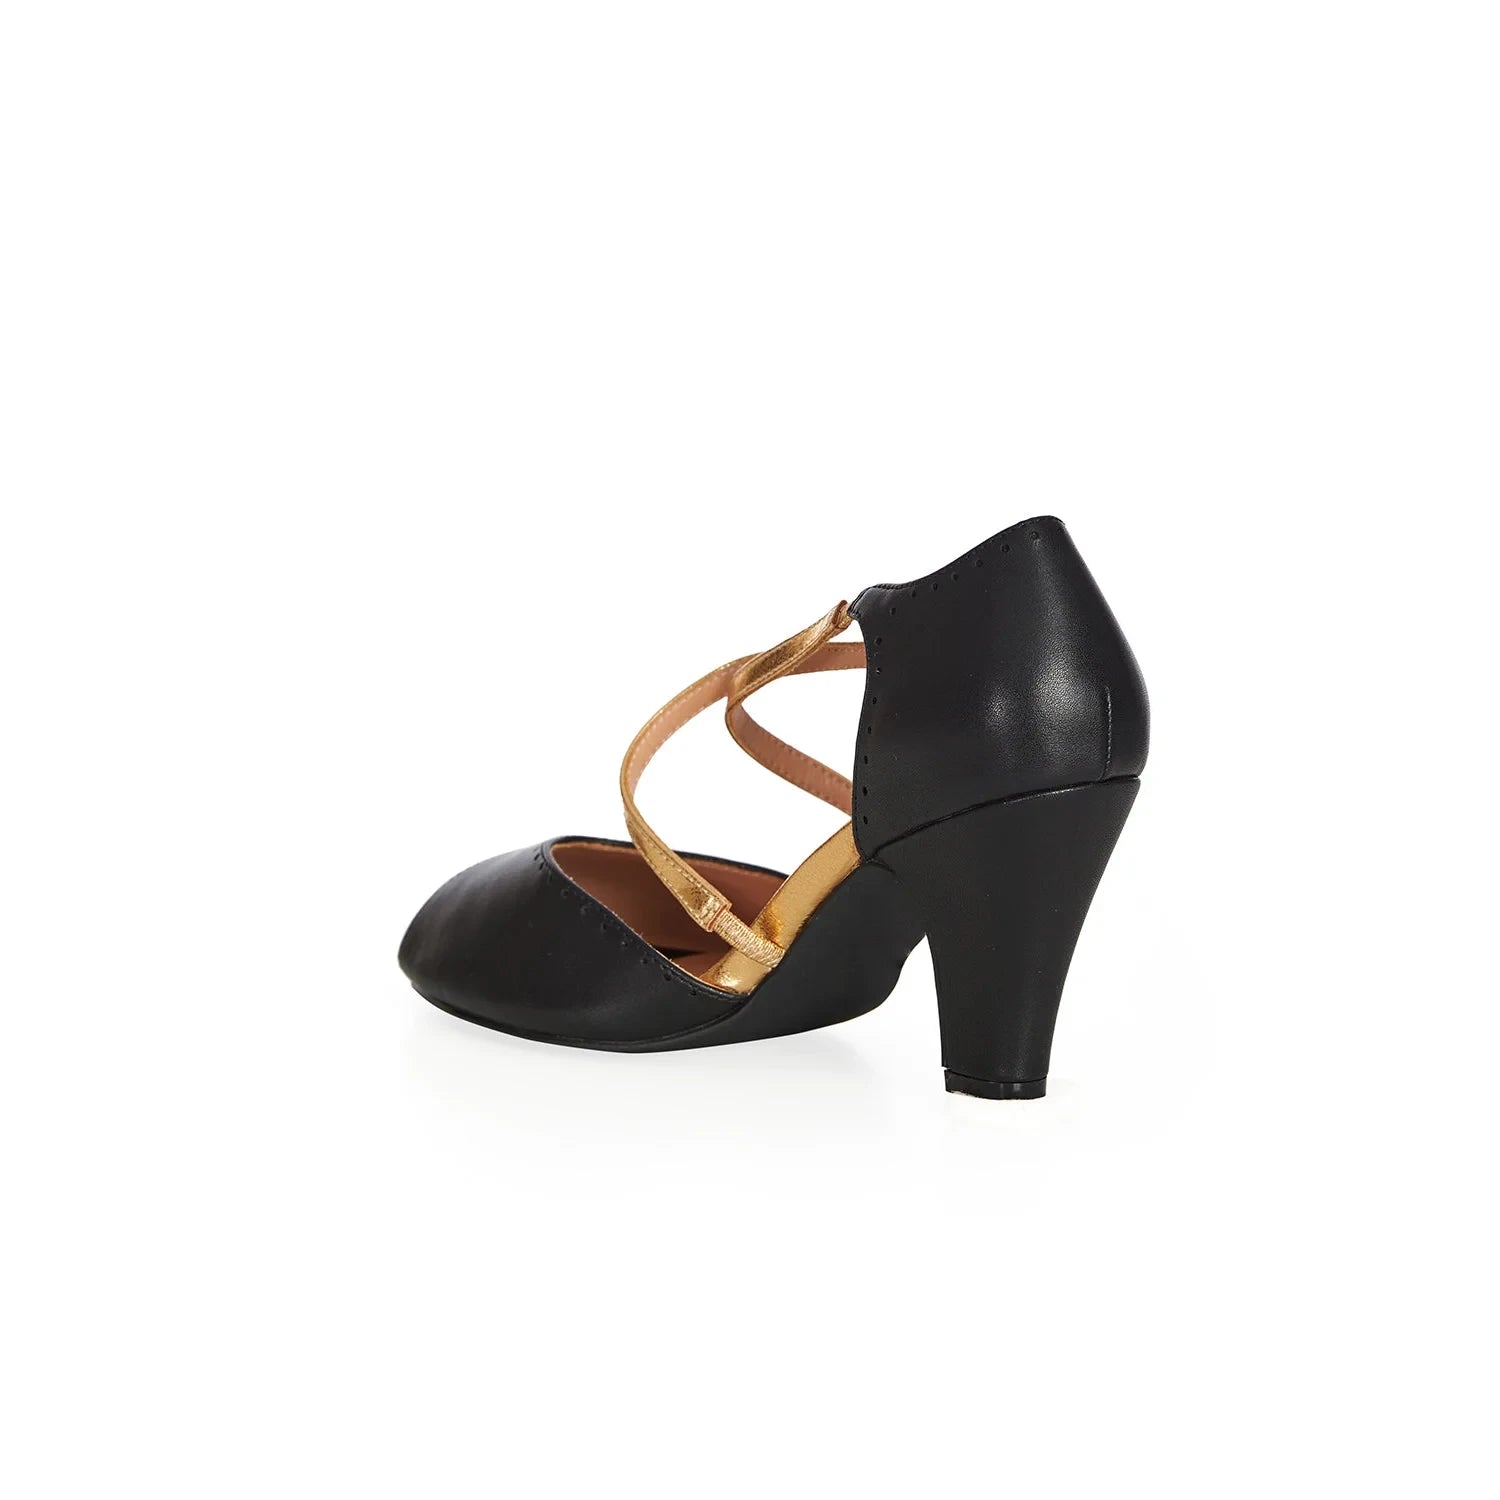 Black Peep Toe dance shoes with Gold crossover strap detail